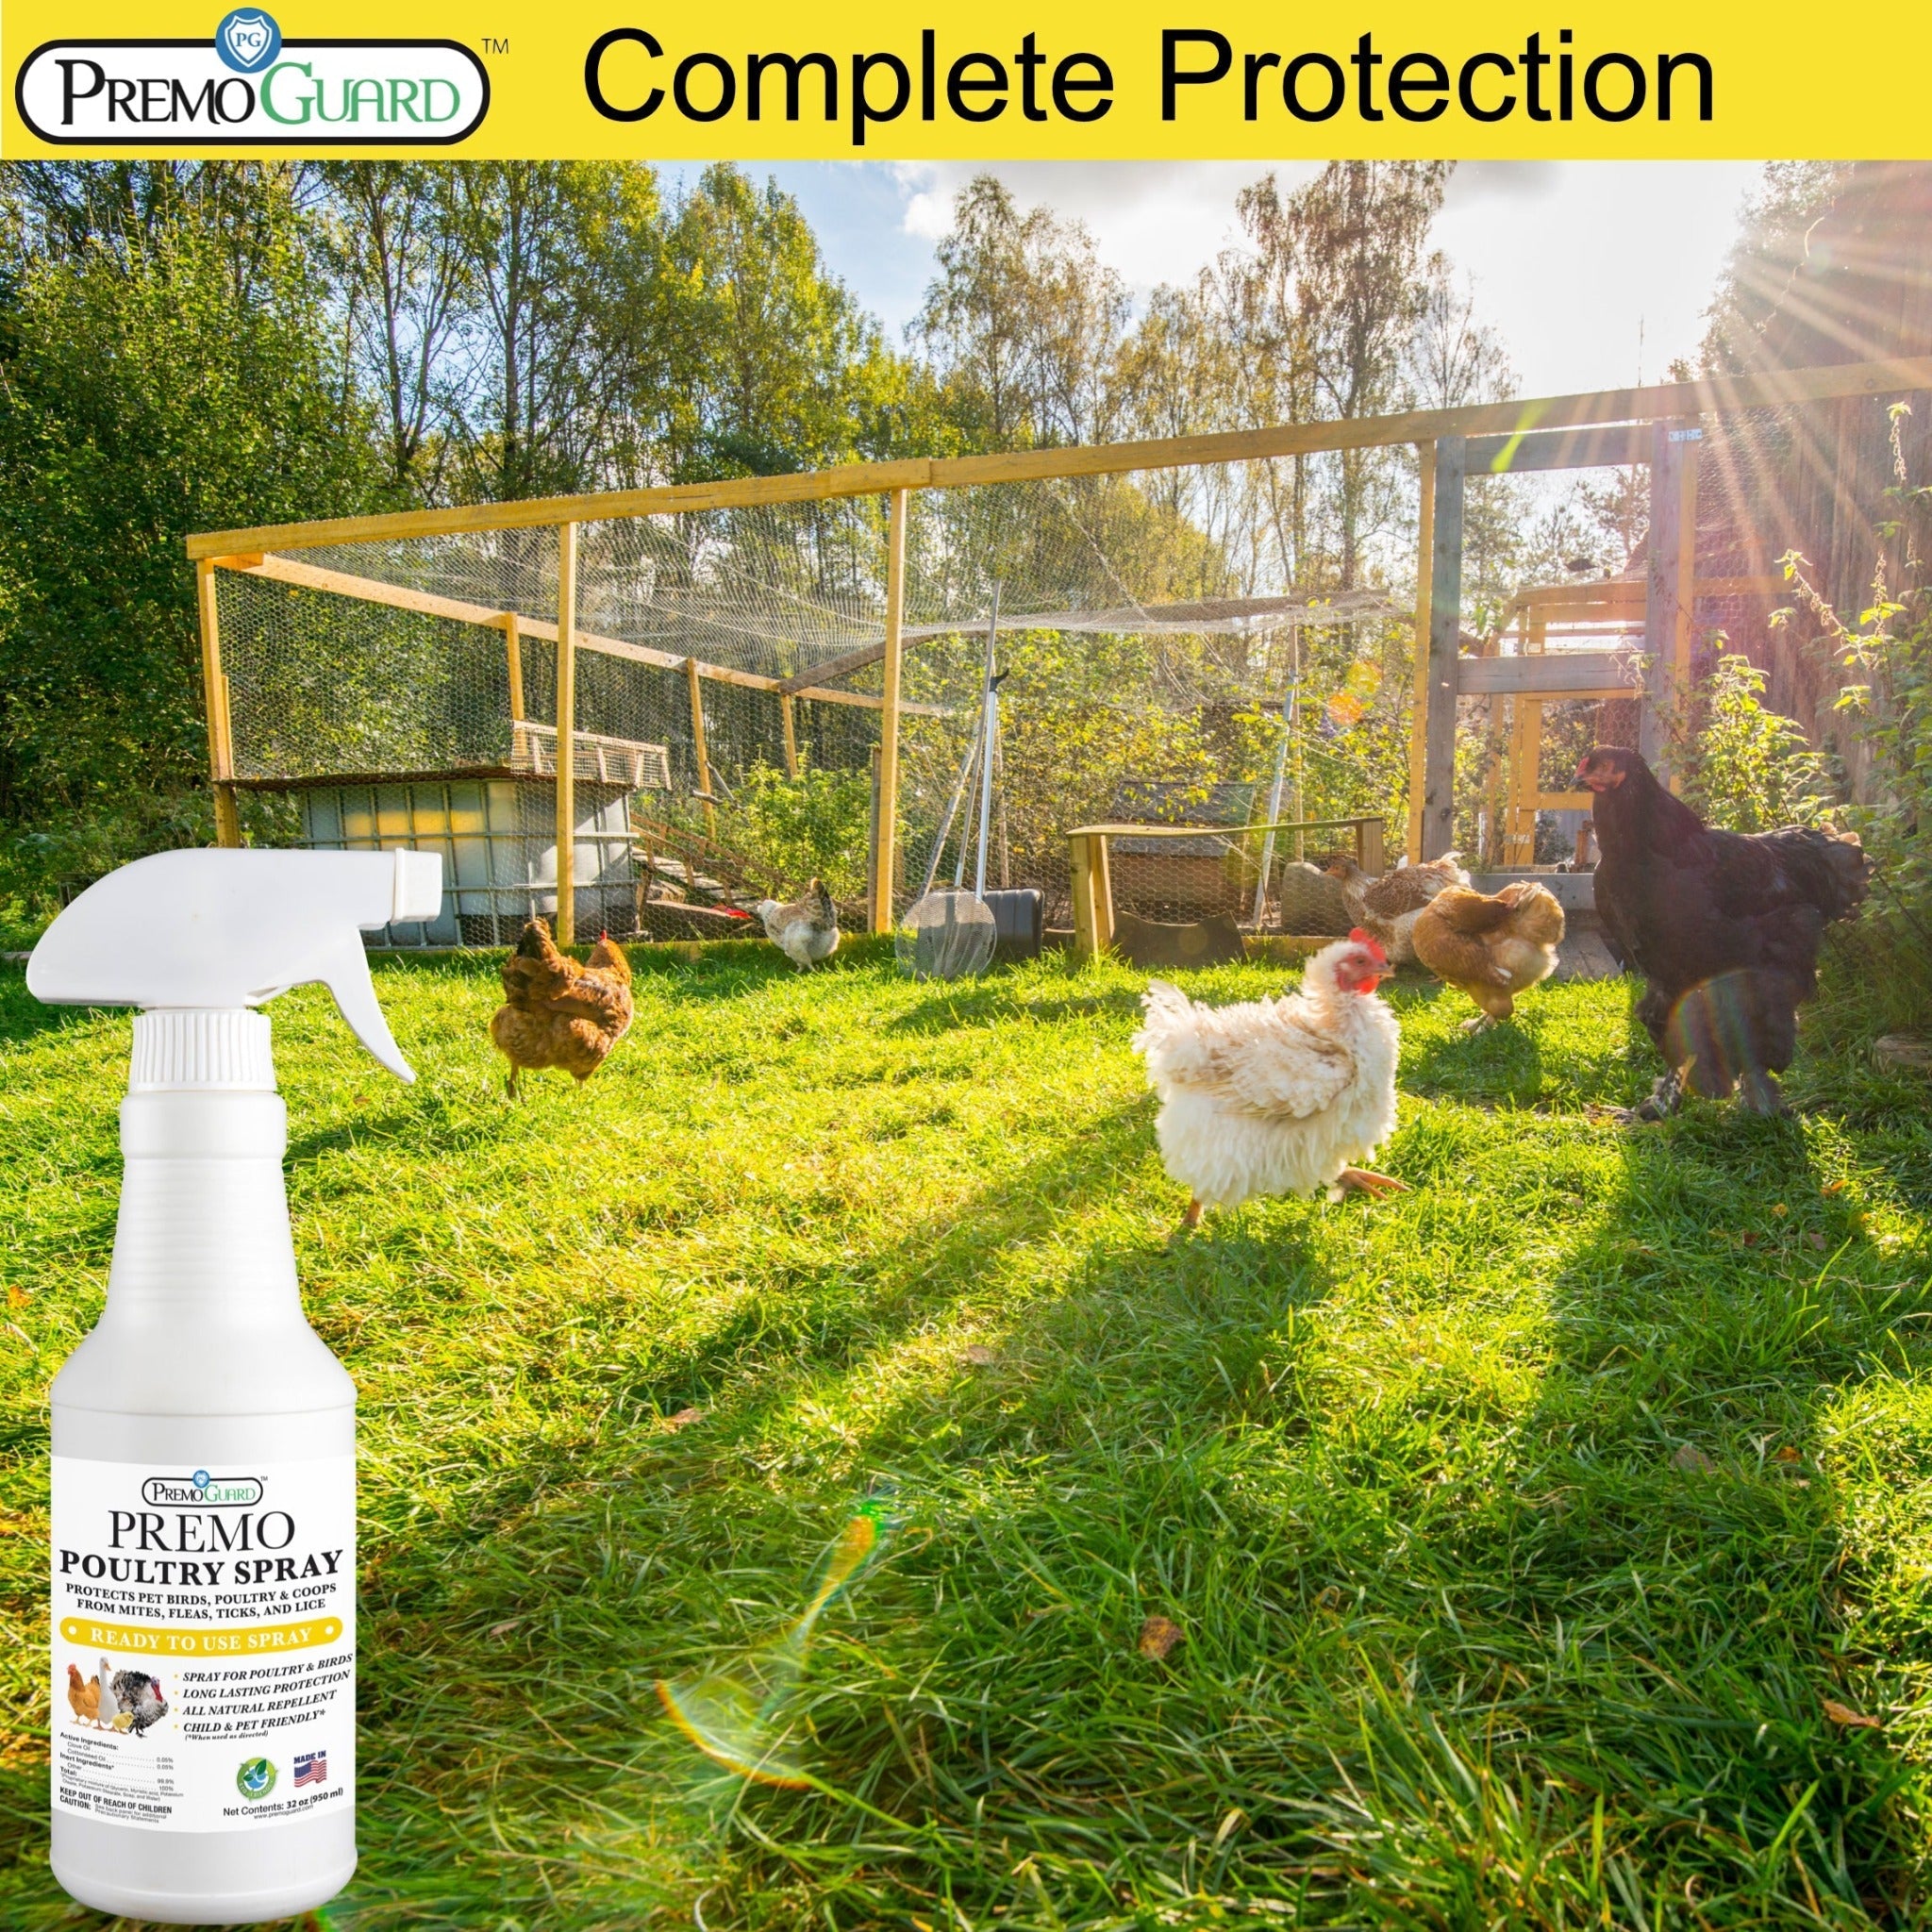 Hatching Time Premo Guard. A garden with 5 roaming chickens on grass. Premo poultry spray can be seen in corner of image.